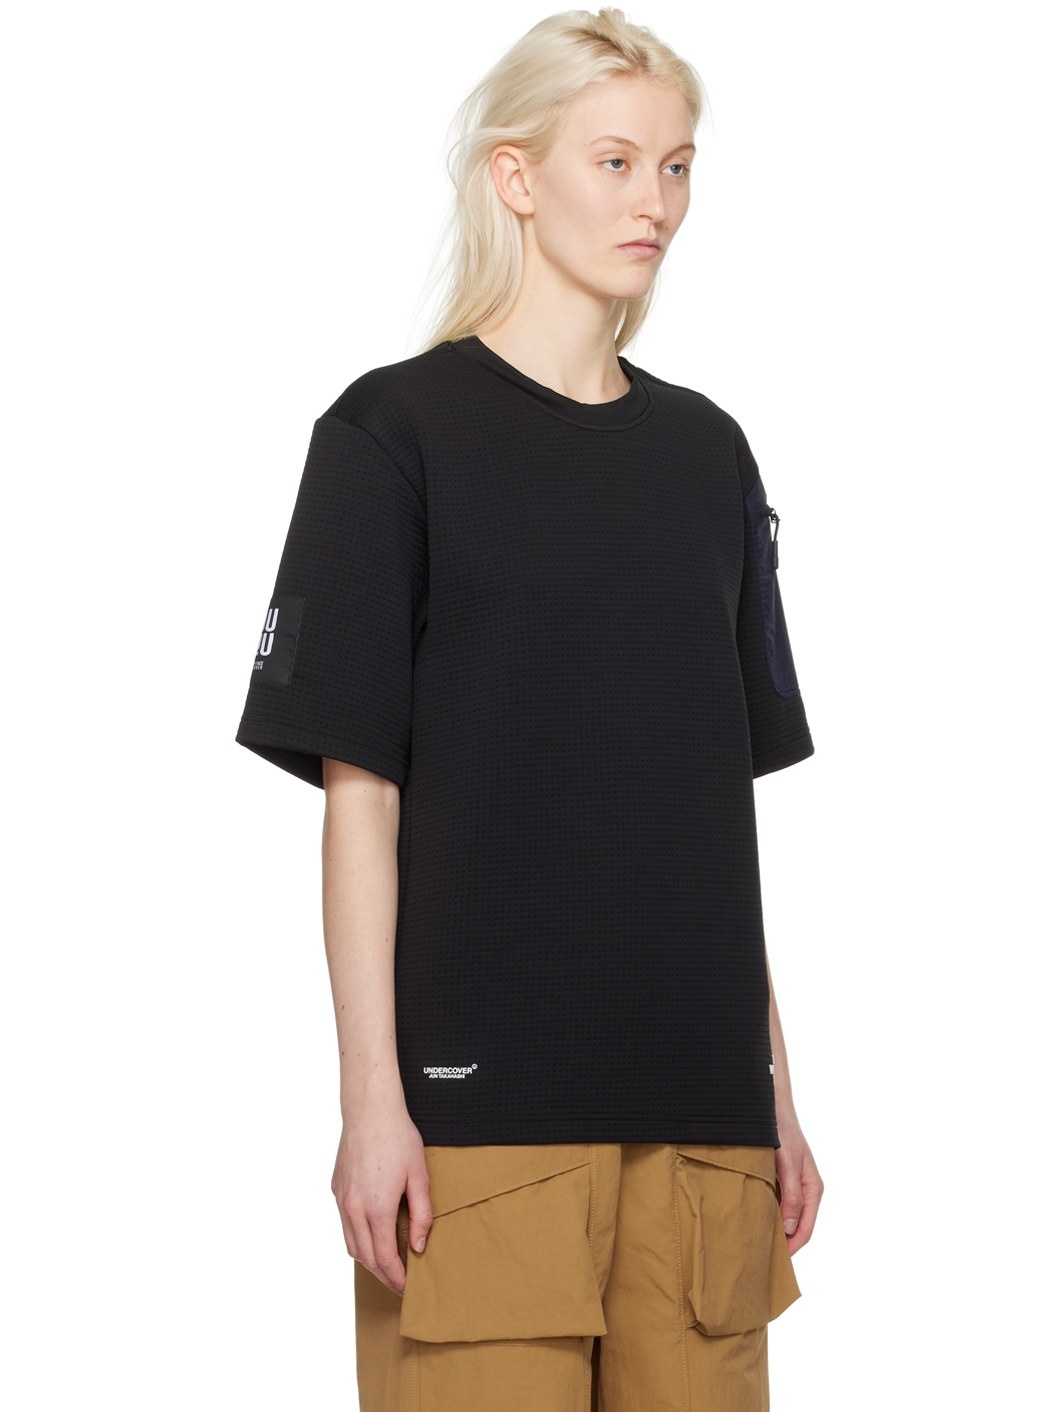 Black The North Face Edition T-Shirt - 2